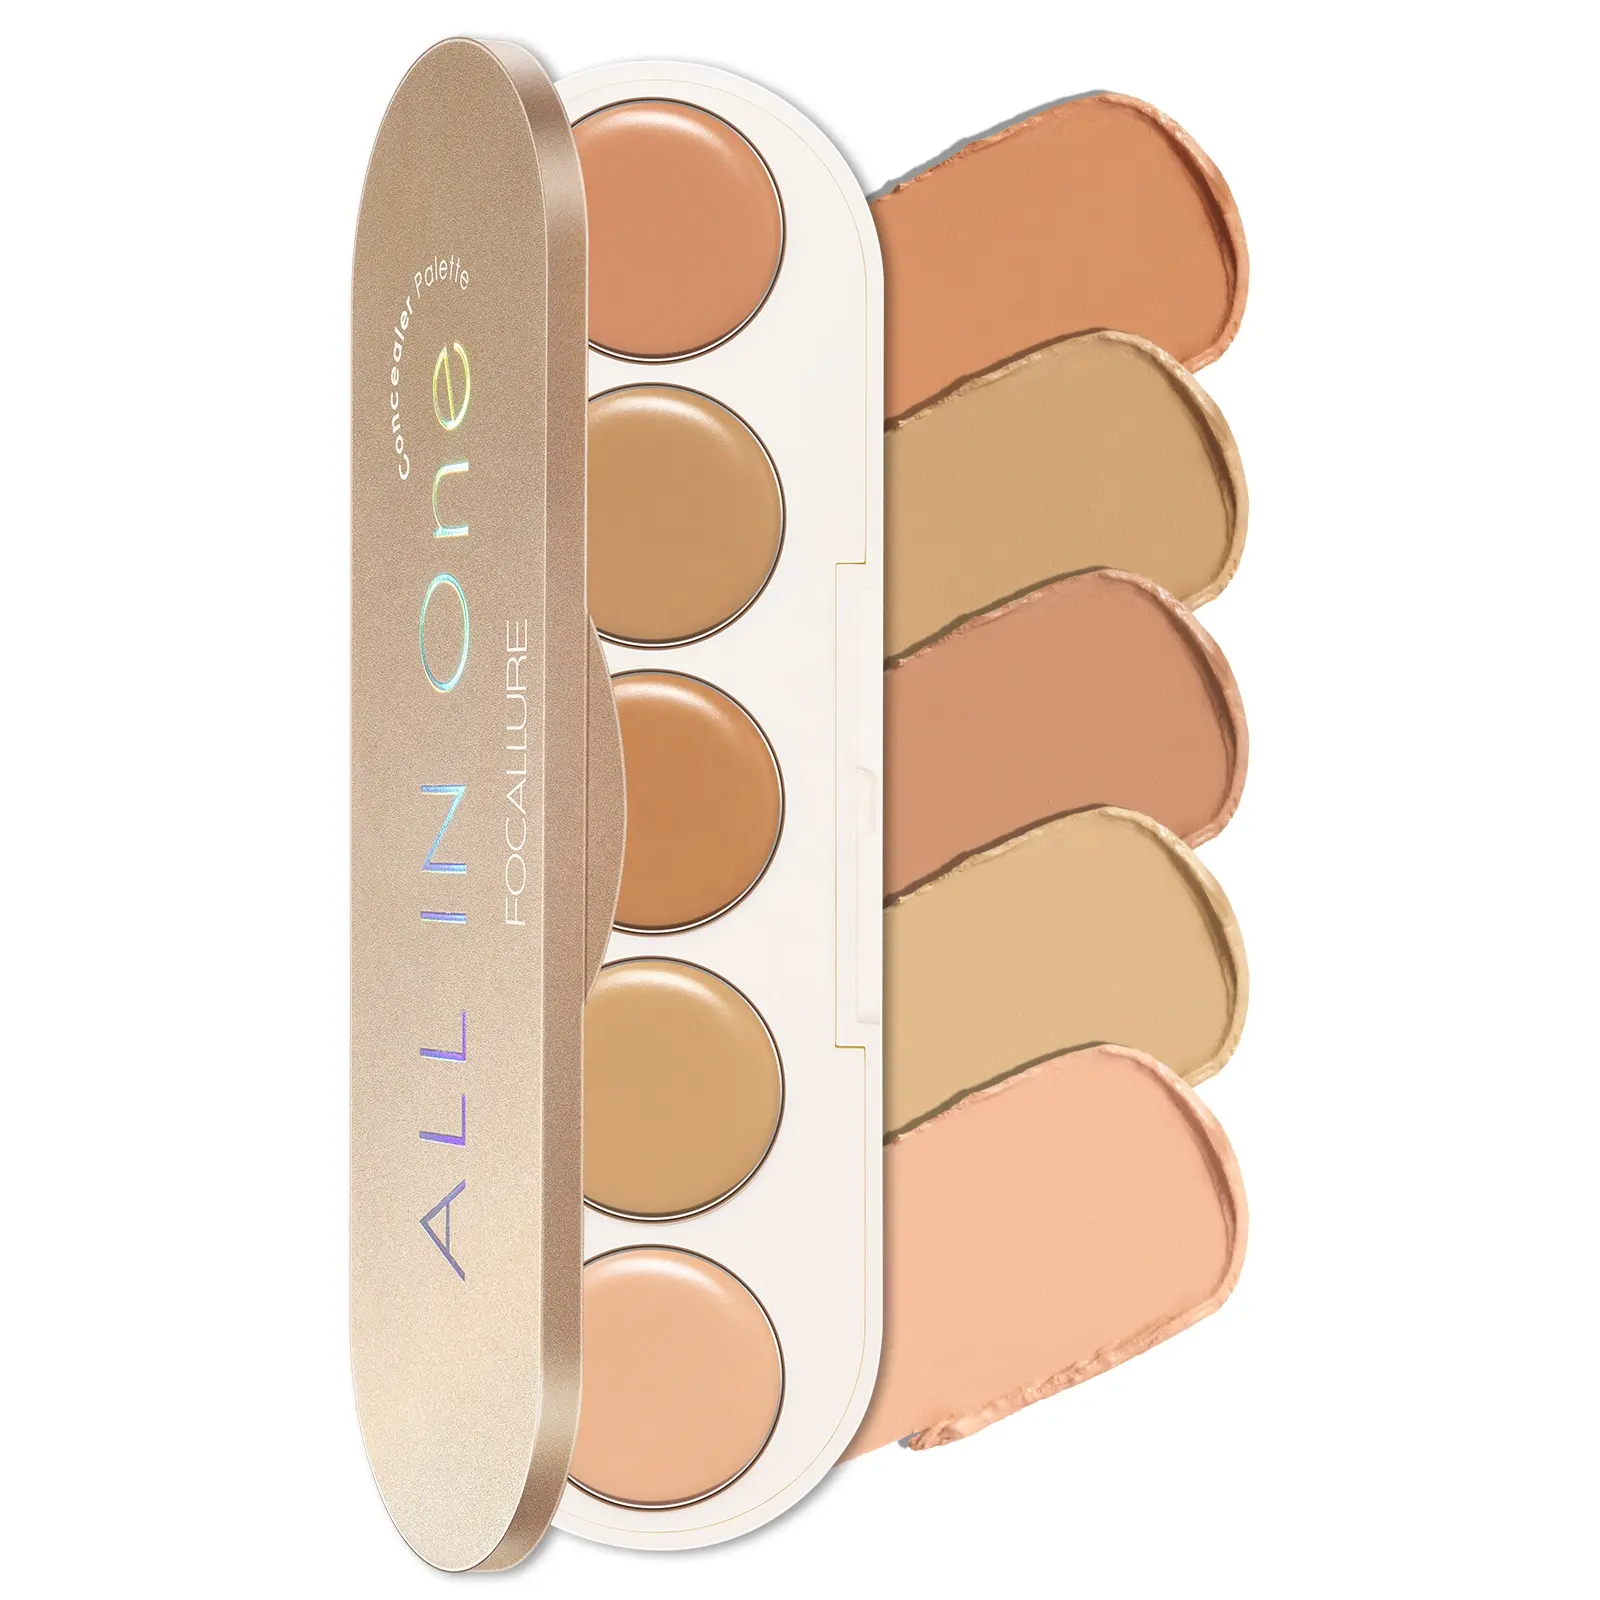 Focallure FA299 All In One Cream Eye Base Concealer Rose Gold Palette Professional Makeup